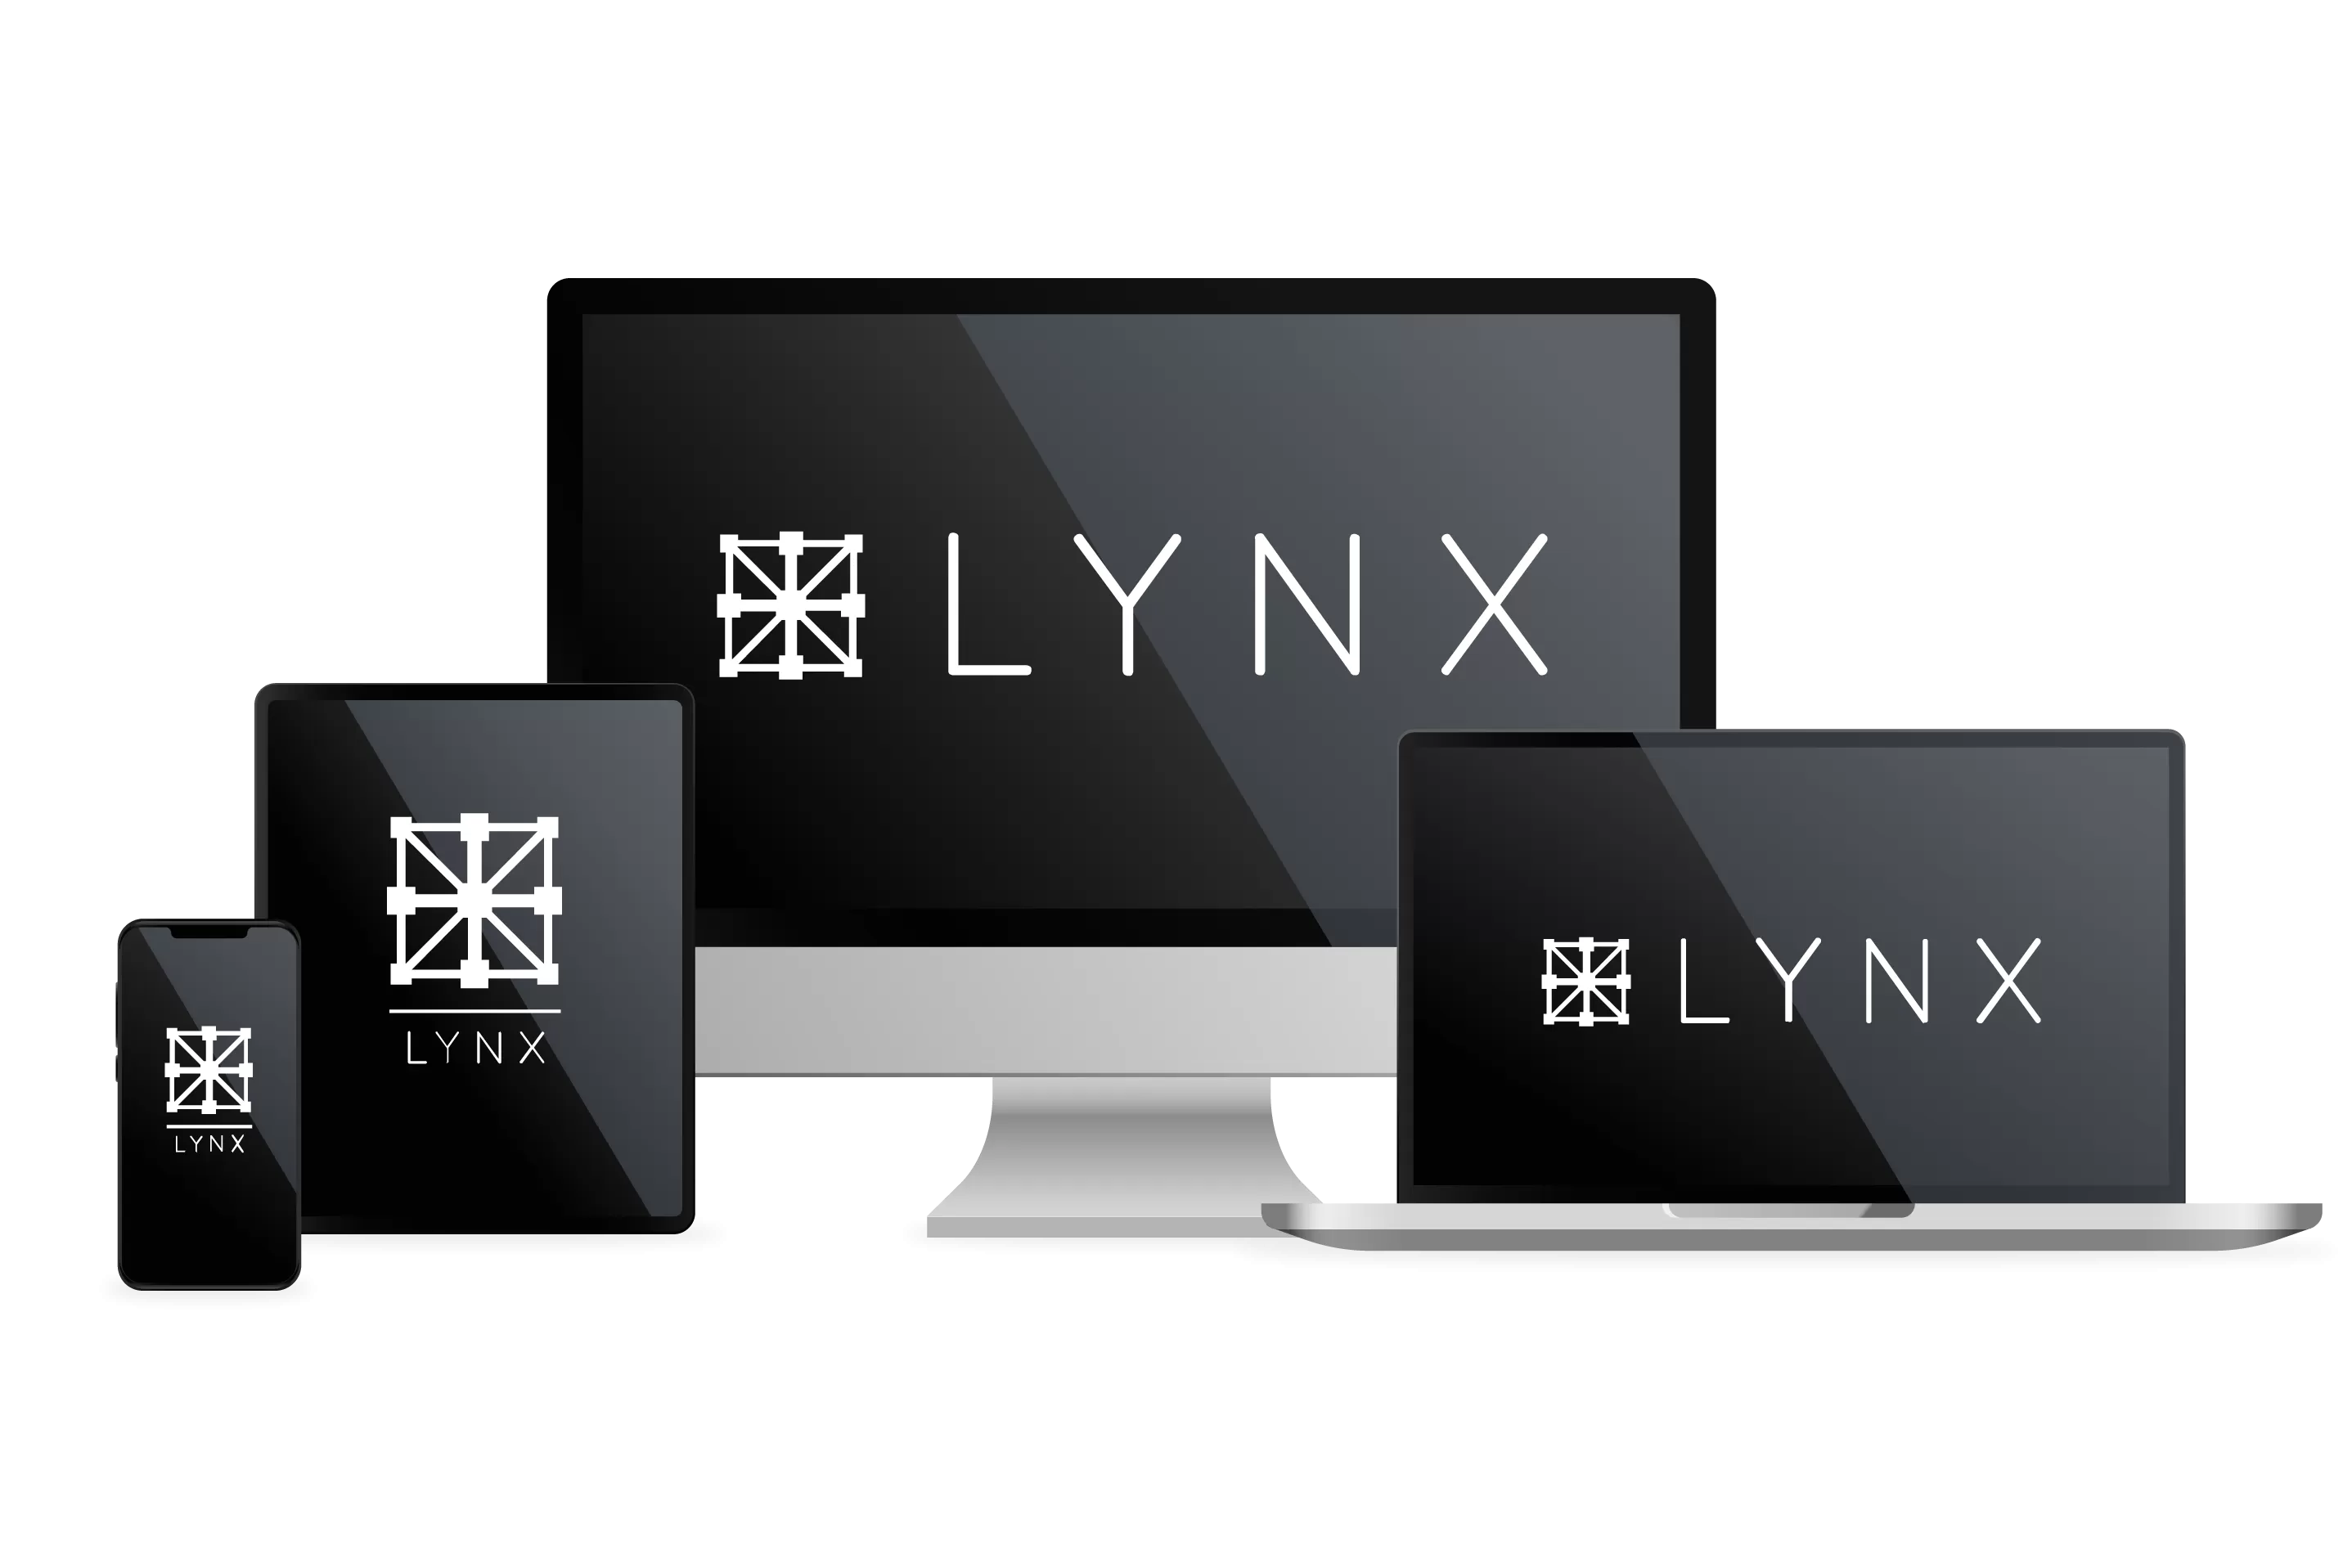 a mobile phone, laptop, tablet and desktop displaying the Lynx logo